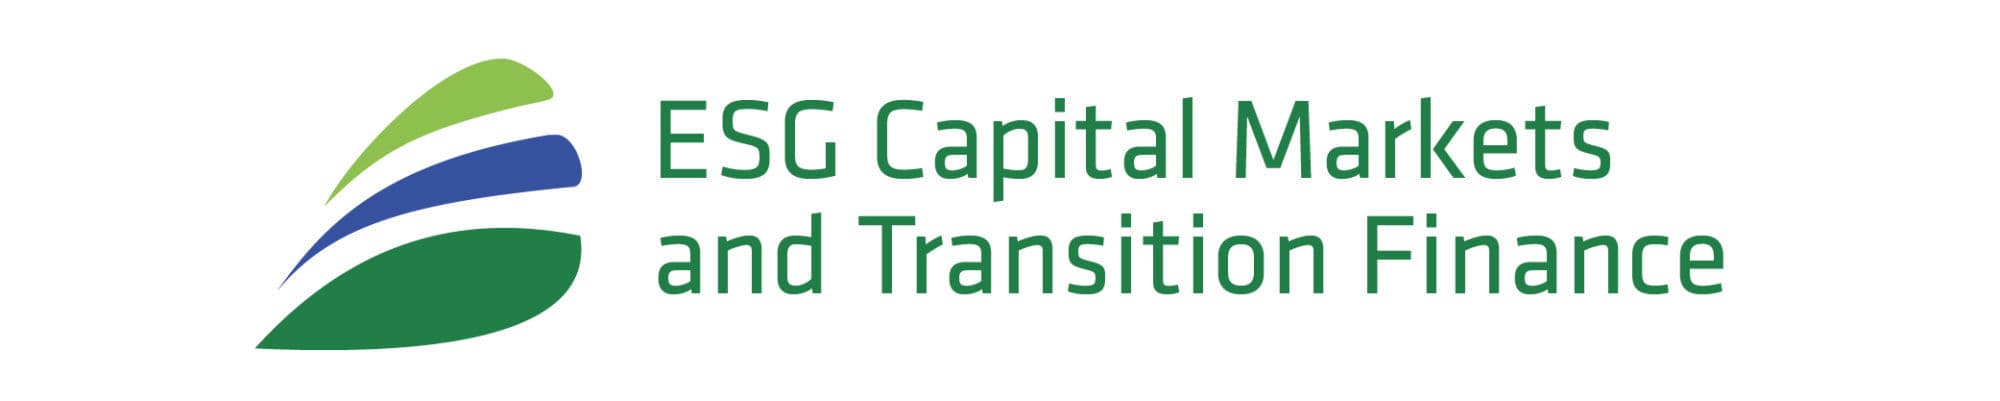 ESG Capital Markets and Transition Finance